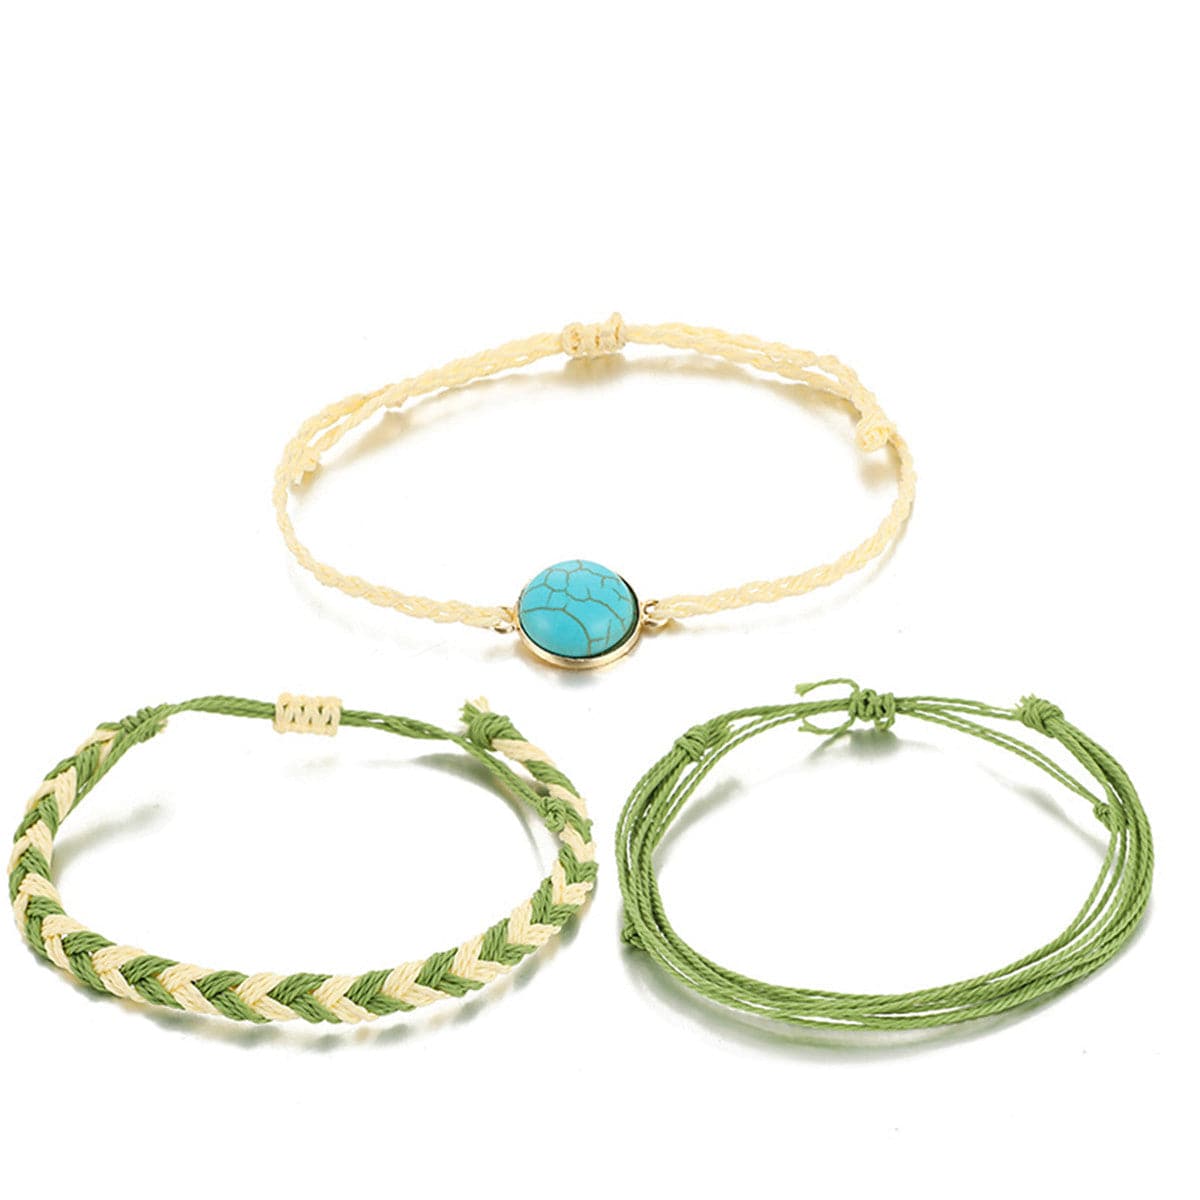 Turquoise & Polyster 18K Gold-Plated Braided Bracelet Set